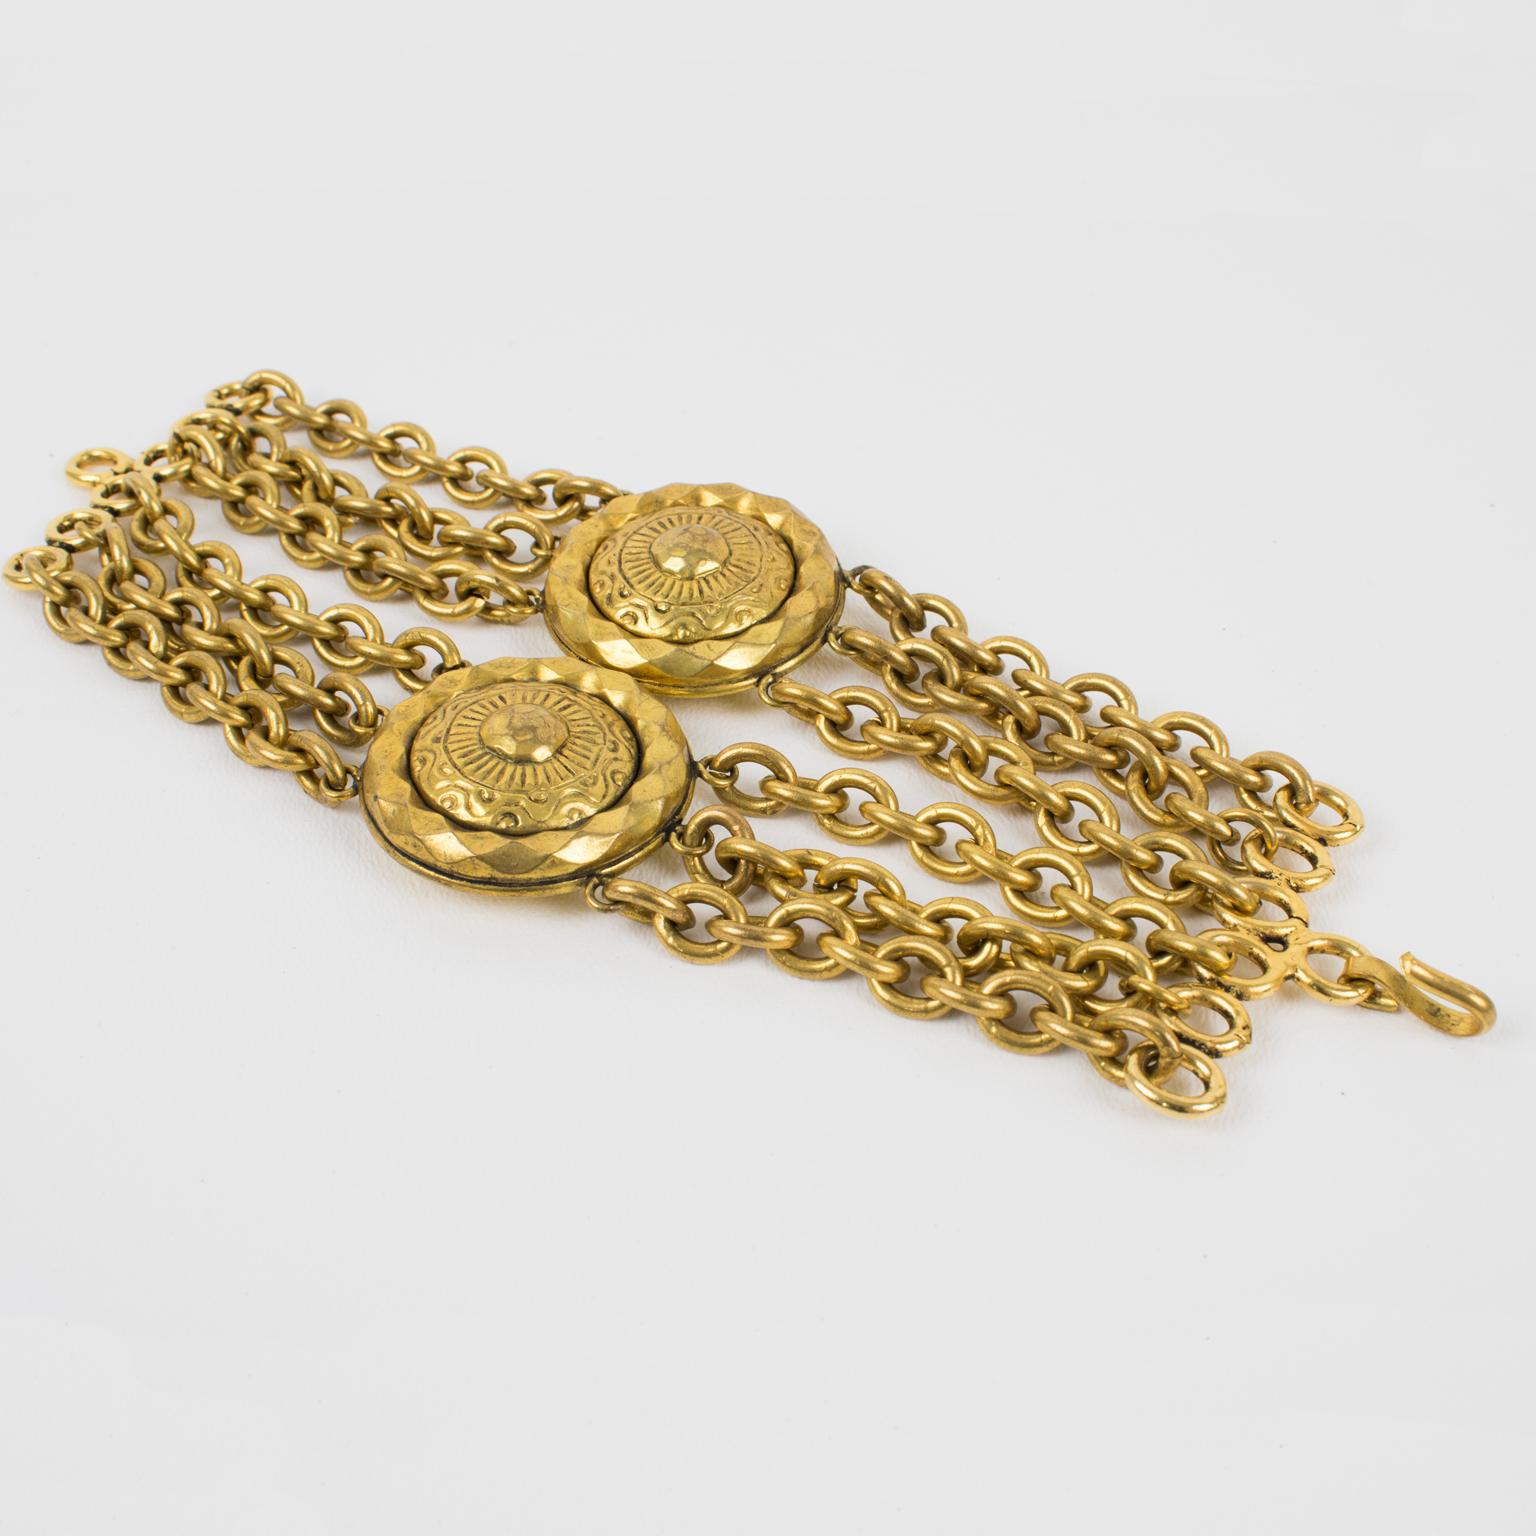 This stunning Mercedes Robirosa Paris link bracelet features an antique gilt metal multi-chain design with a massive shape and is complemented by two large carved medallions. The bracelet is signed at the back with the Robirosa brand logo. 
The